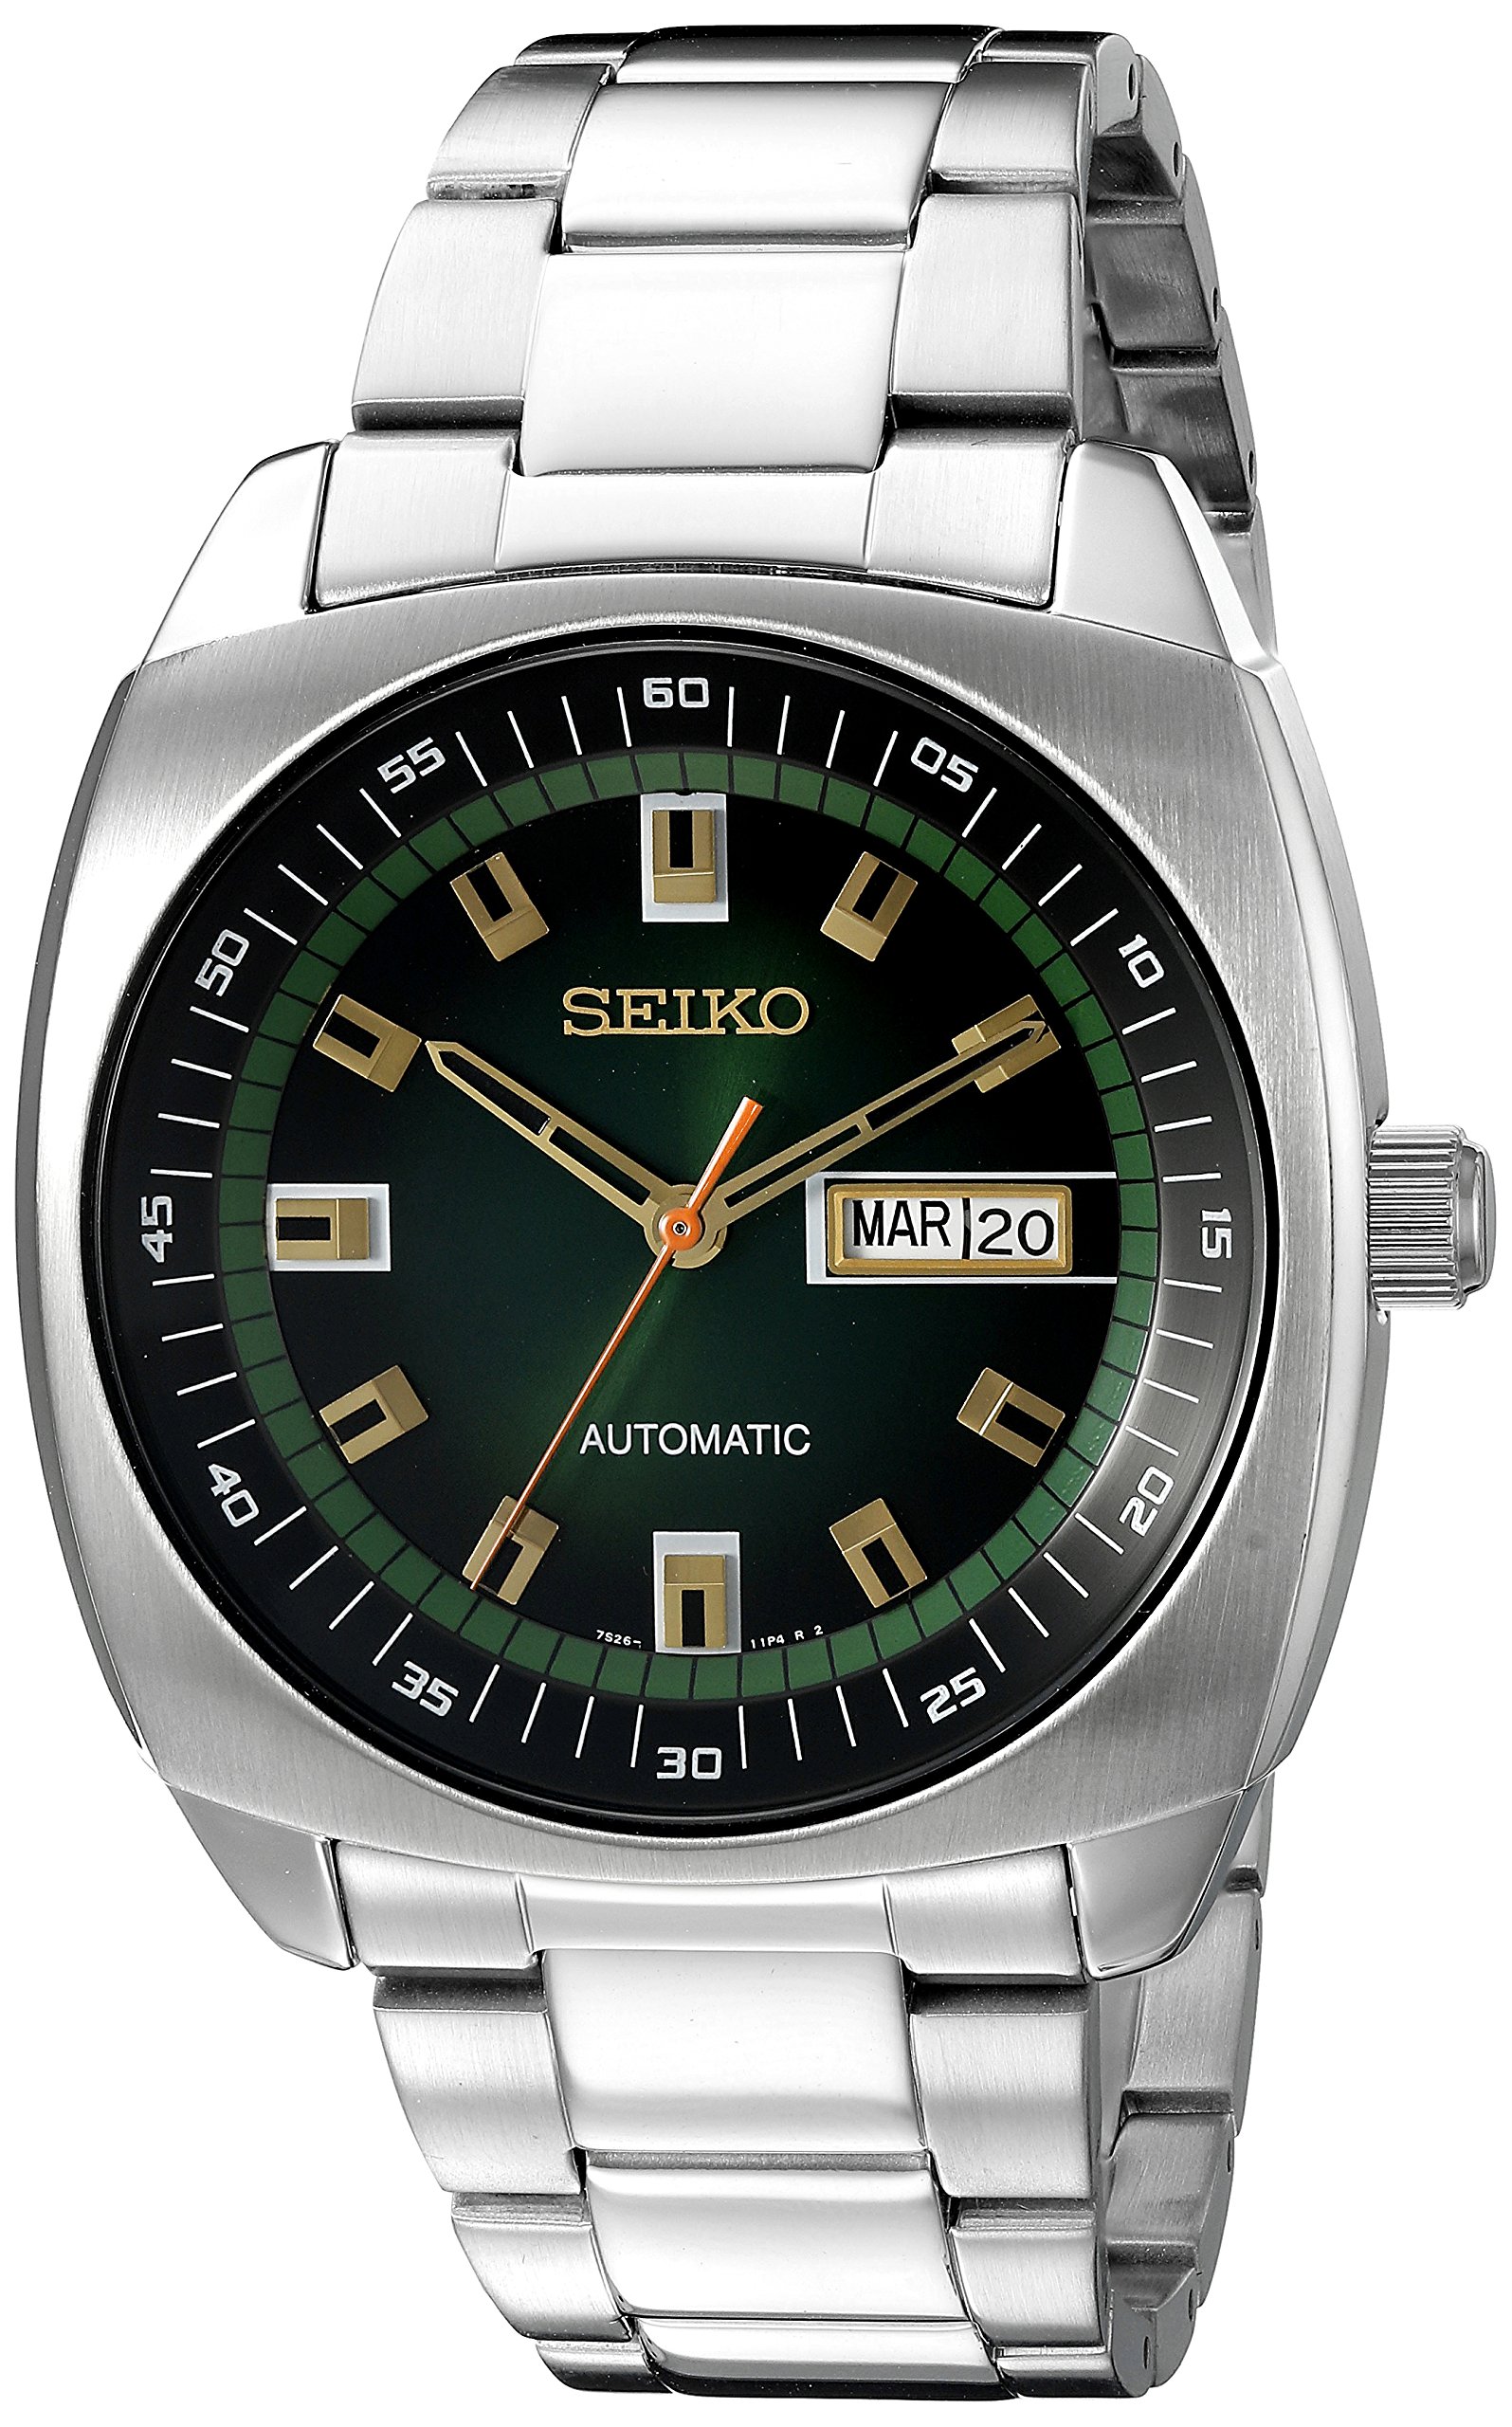 SEIKO Automatic Watch for Men - Recraft Series - Stainless Steel Case and Bracelet, Day/Date Calendar, 50m Water Resistant, and 41 Hour Power Reserve